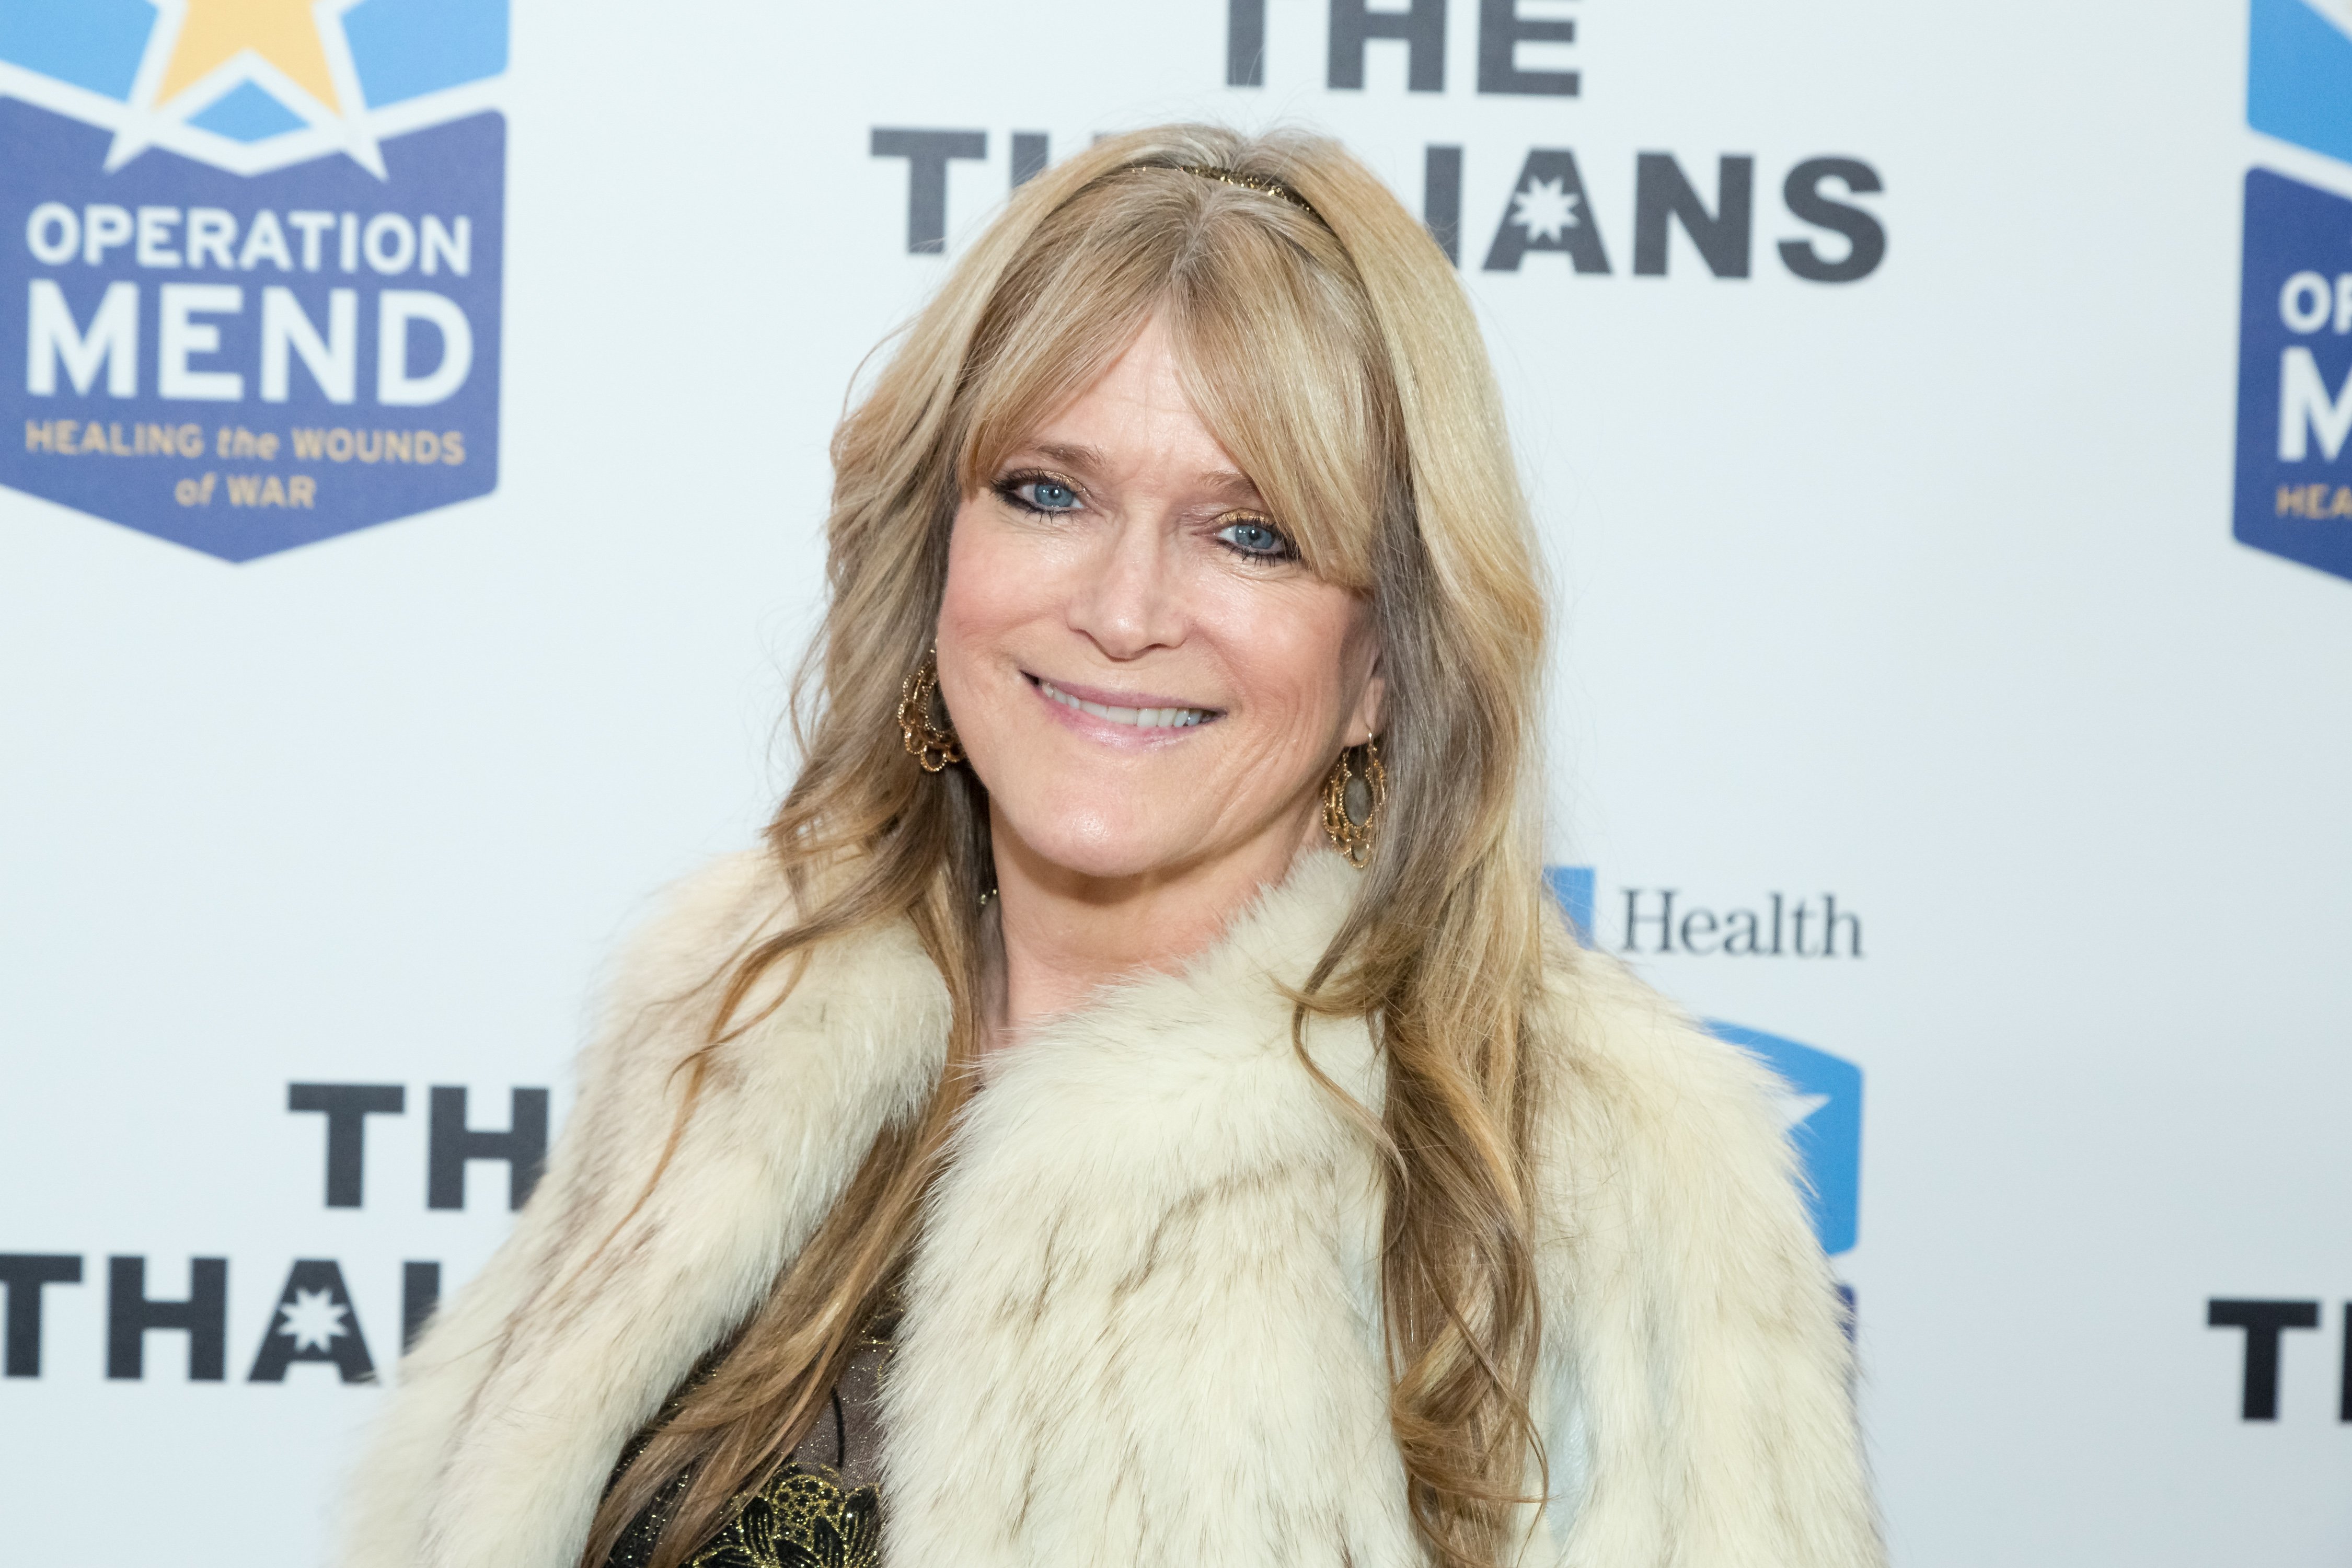 Susan Olsen attends The Thalians Holiday Party in Los Angeles, California on December 1, 2018 | Photo: Getty Images